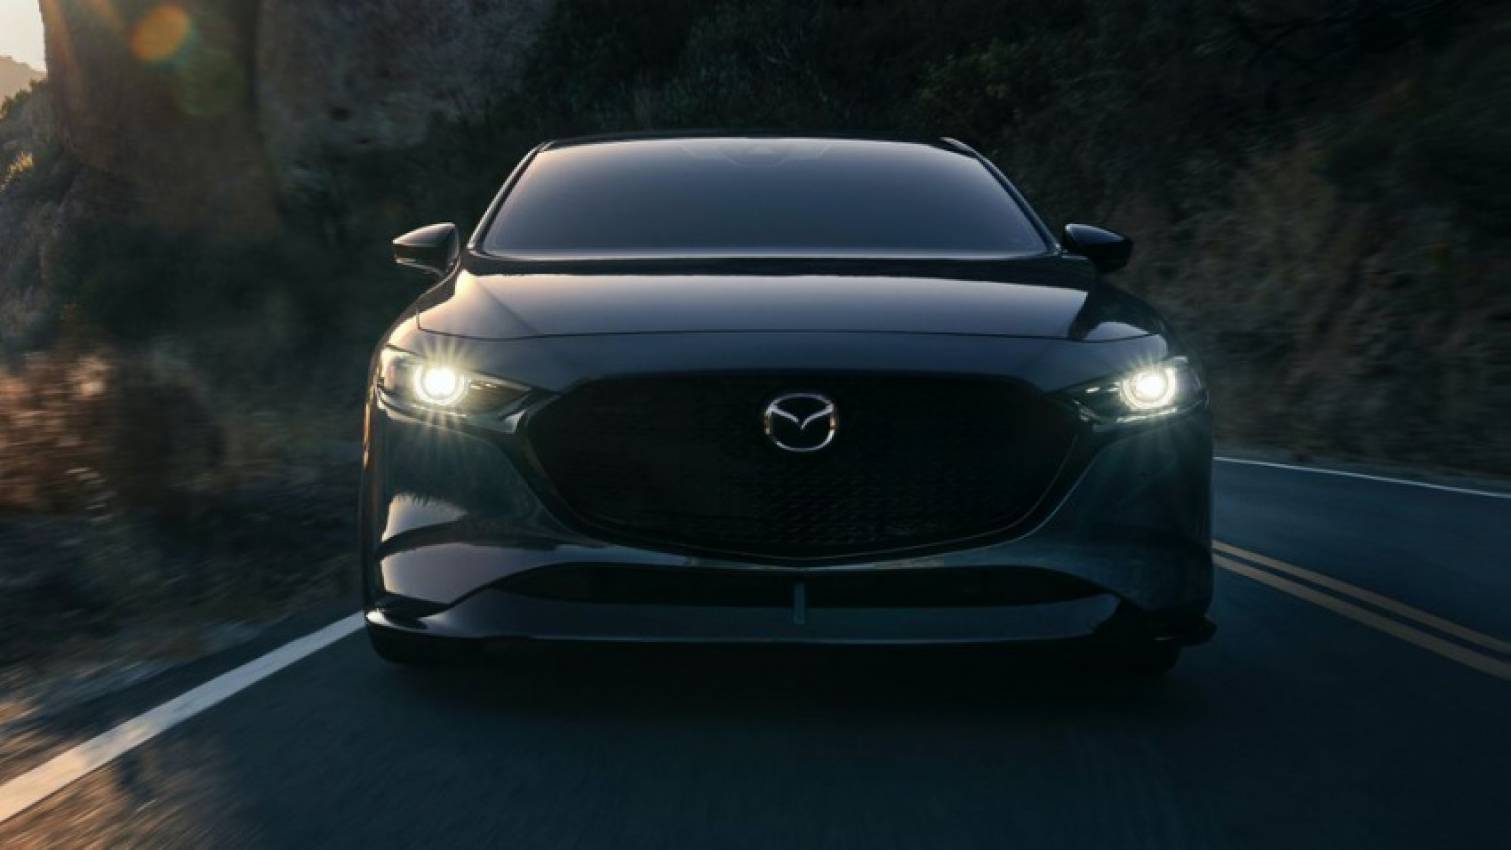 autos, cars, hp, mazda, auto news, awd, mazda 3, mega hatch, skyactiv-g, usa, the 250hp awd mazda 3 revealed (with video) - just don’t call it an mps